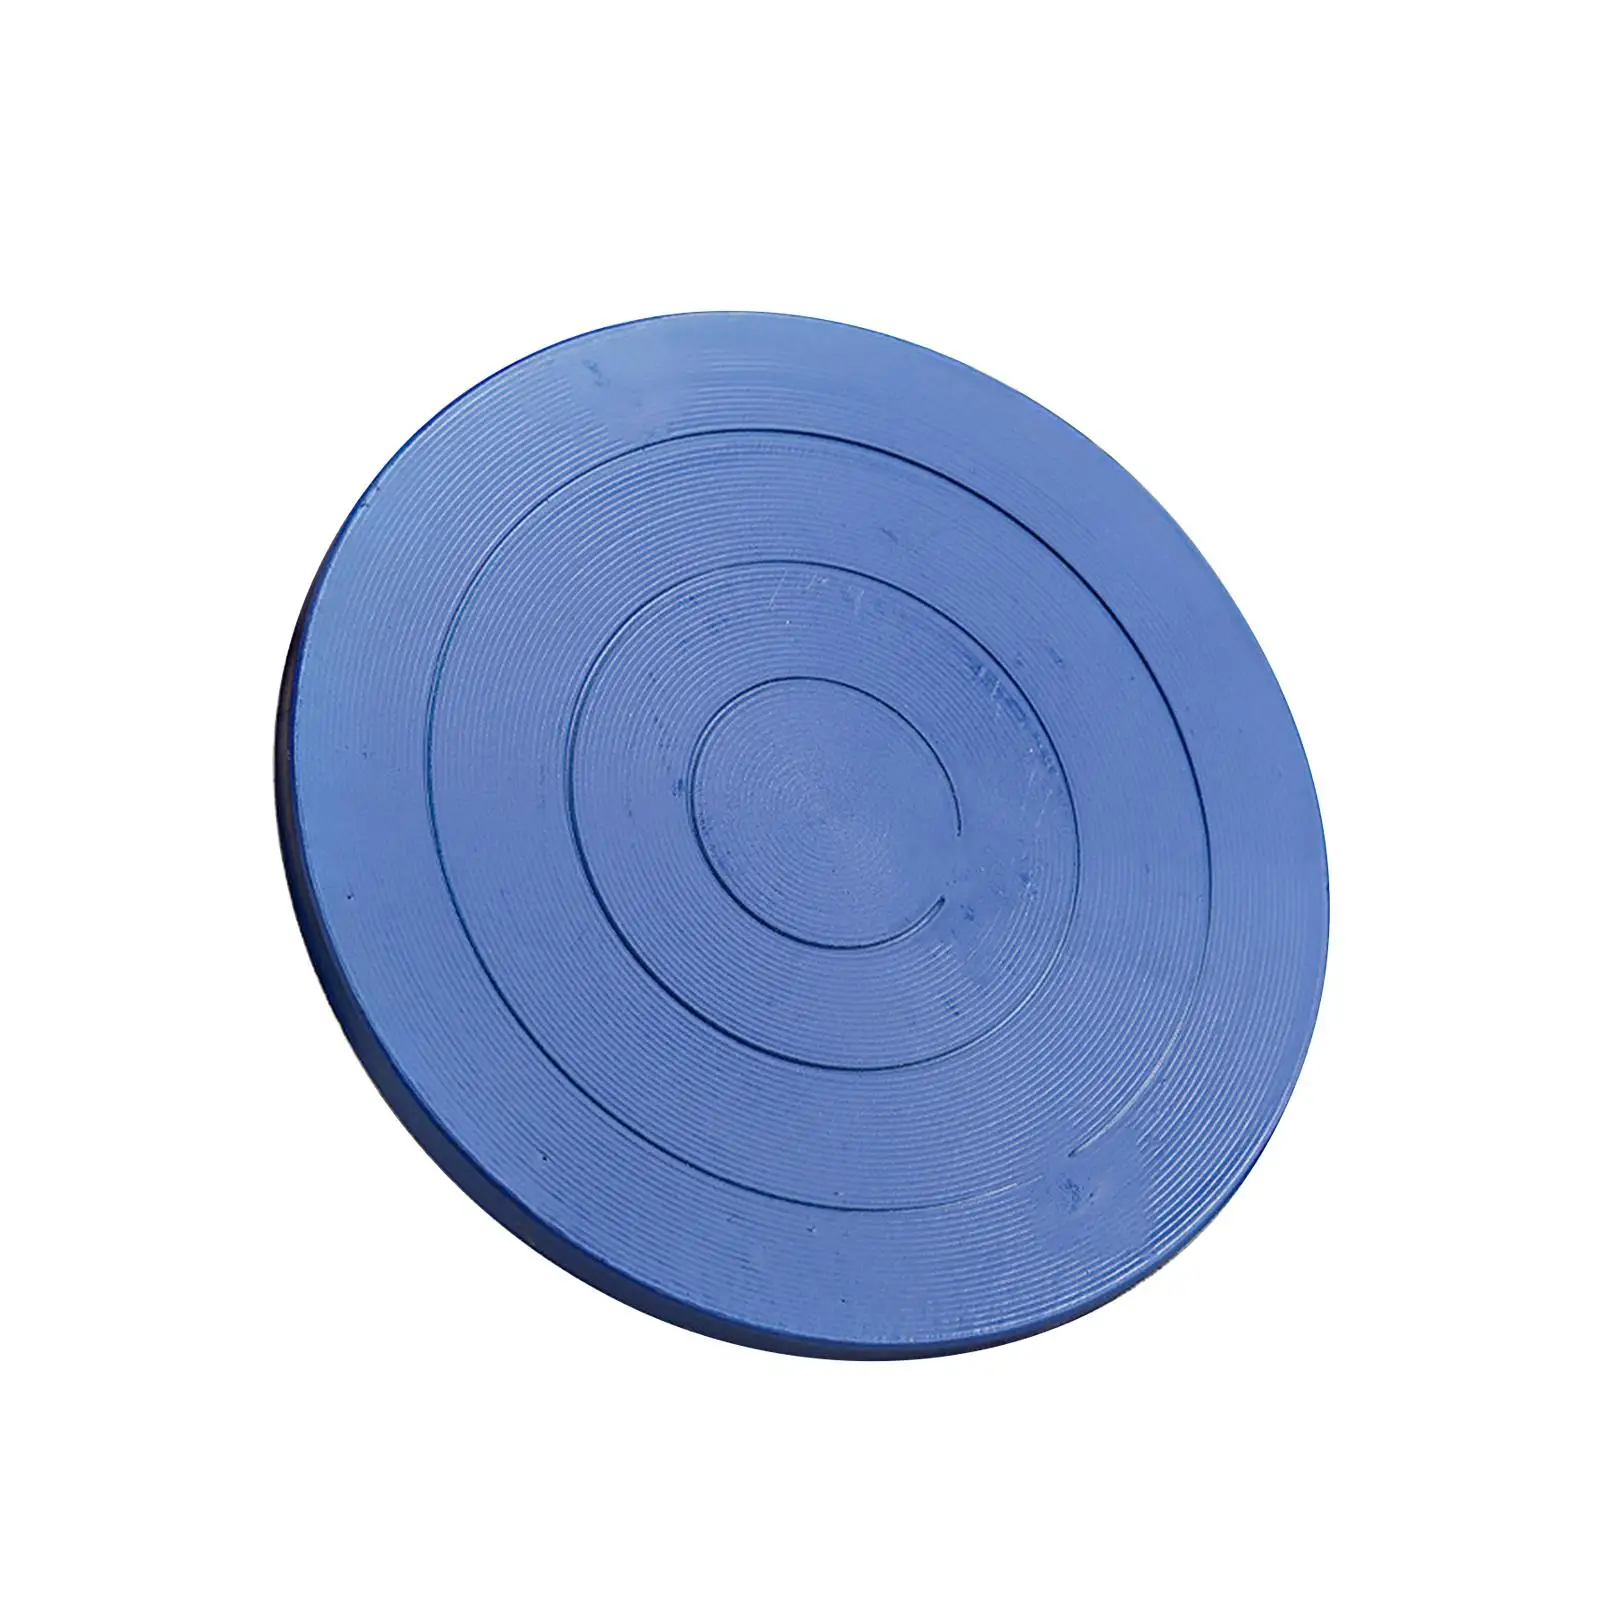 Sculpting Wheel Turntable Banding Wheel Arts Supply Double Side Heavy Duty Cake Decorating Clay Ceramics Pottery Sculpting Wheel